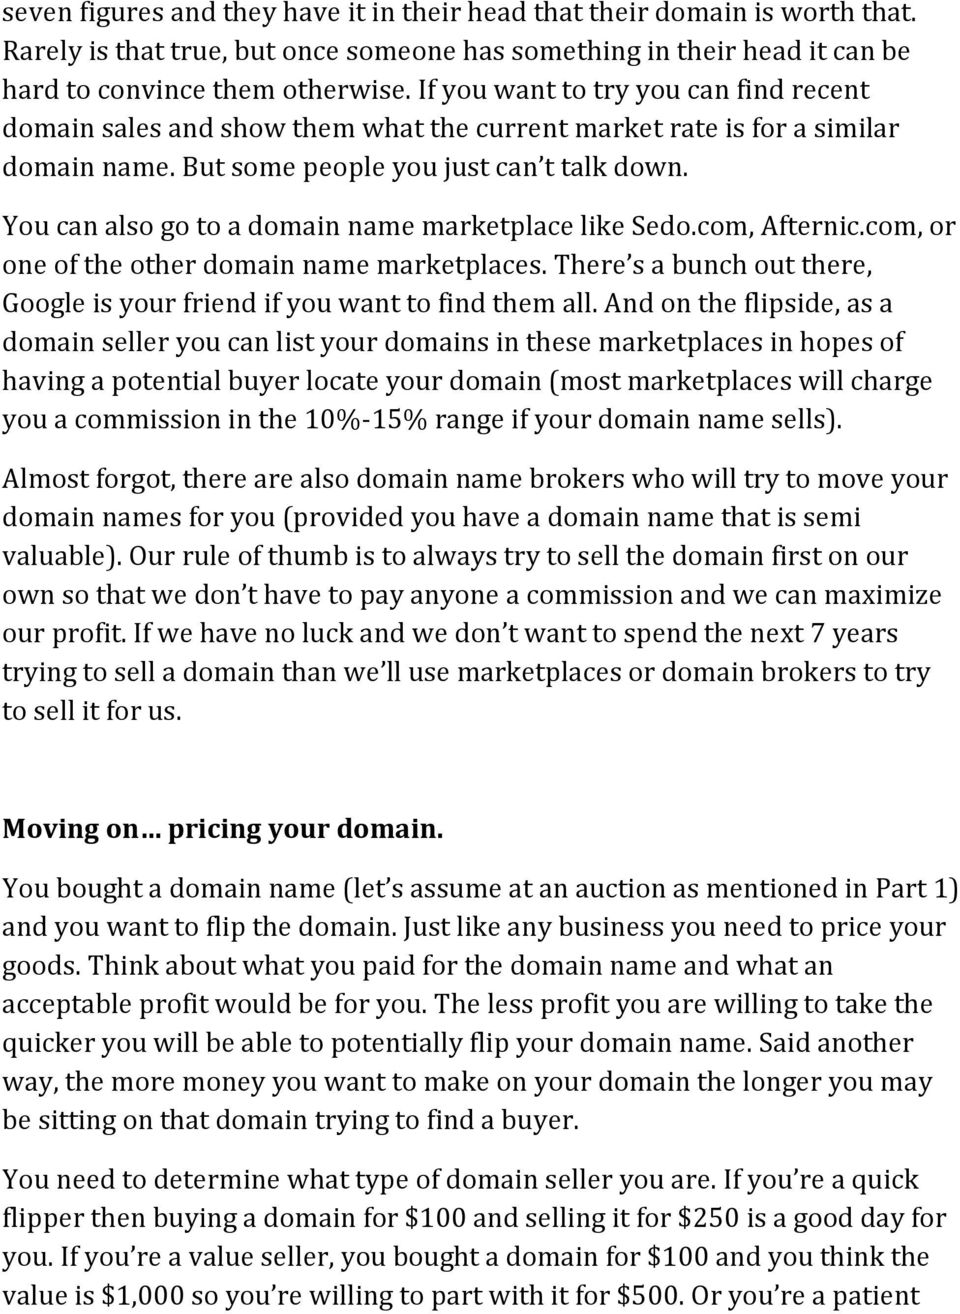 You can also go to a domain name marketplace like Sedo.com, Afternic.com, or one of the other domain name marketplaces. There s a bunch out there, Google is your friend if you want to find them all.